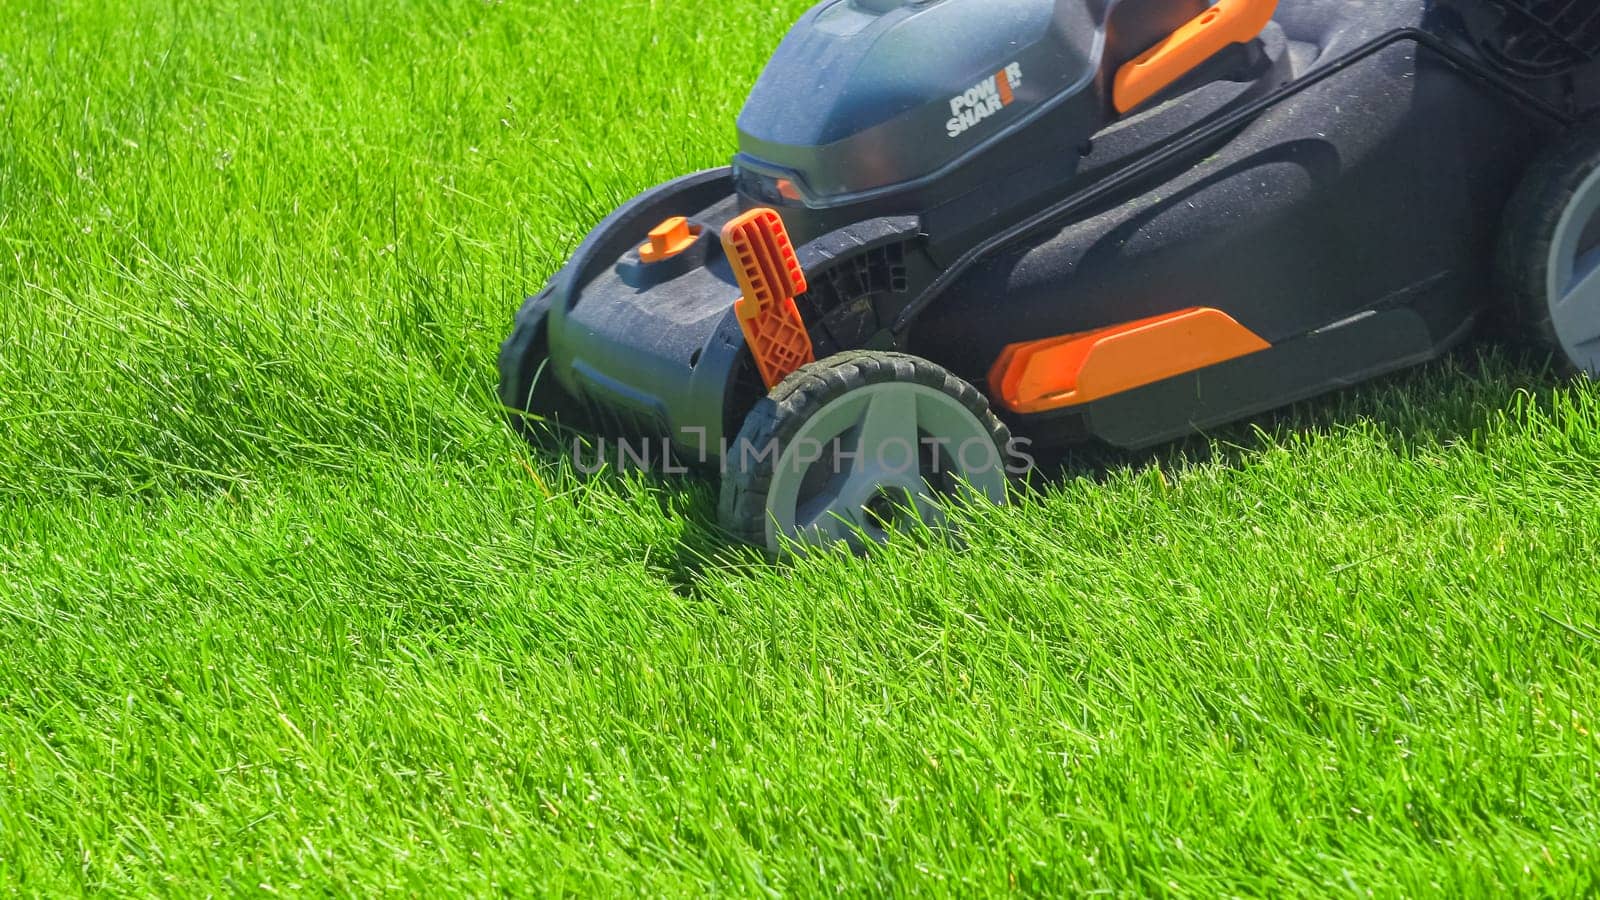 Castle Rock, Colorado, USA-June 25, 2023- At a residential suburban house, a lush green lawn is meticulously mowed using an electric lawn mower, creating a well-manicured and inviting outdoor space.